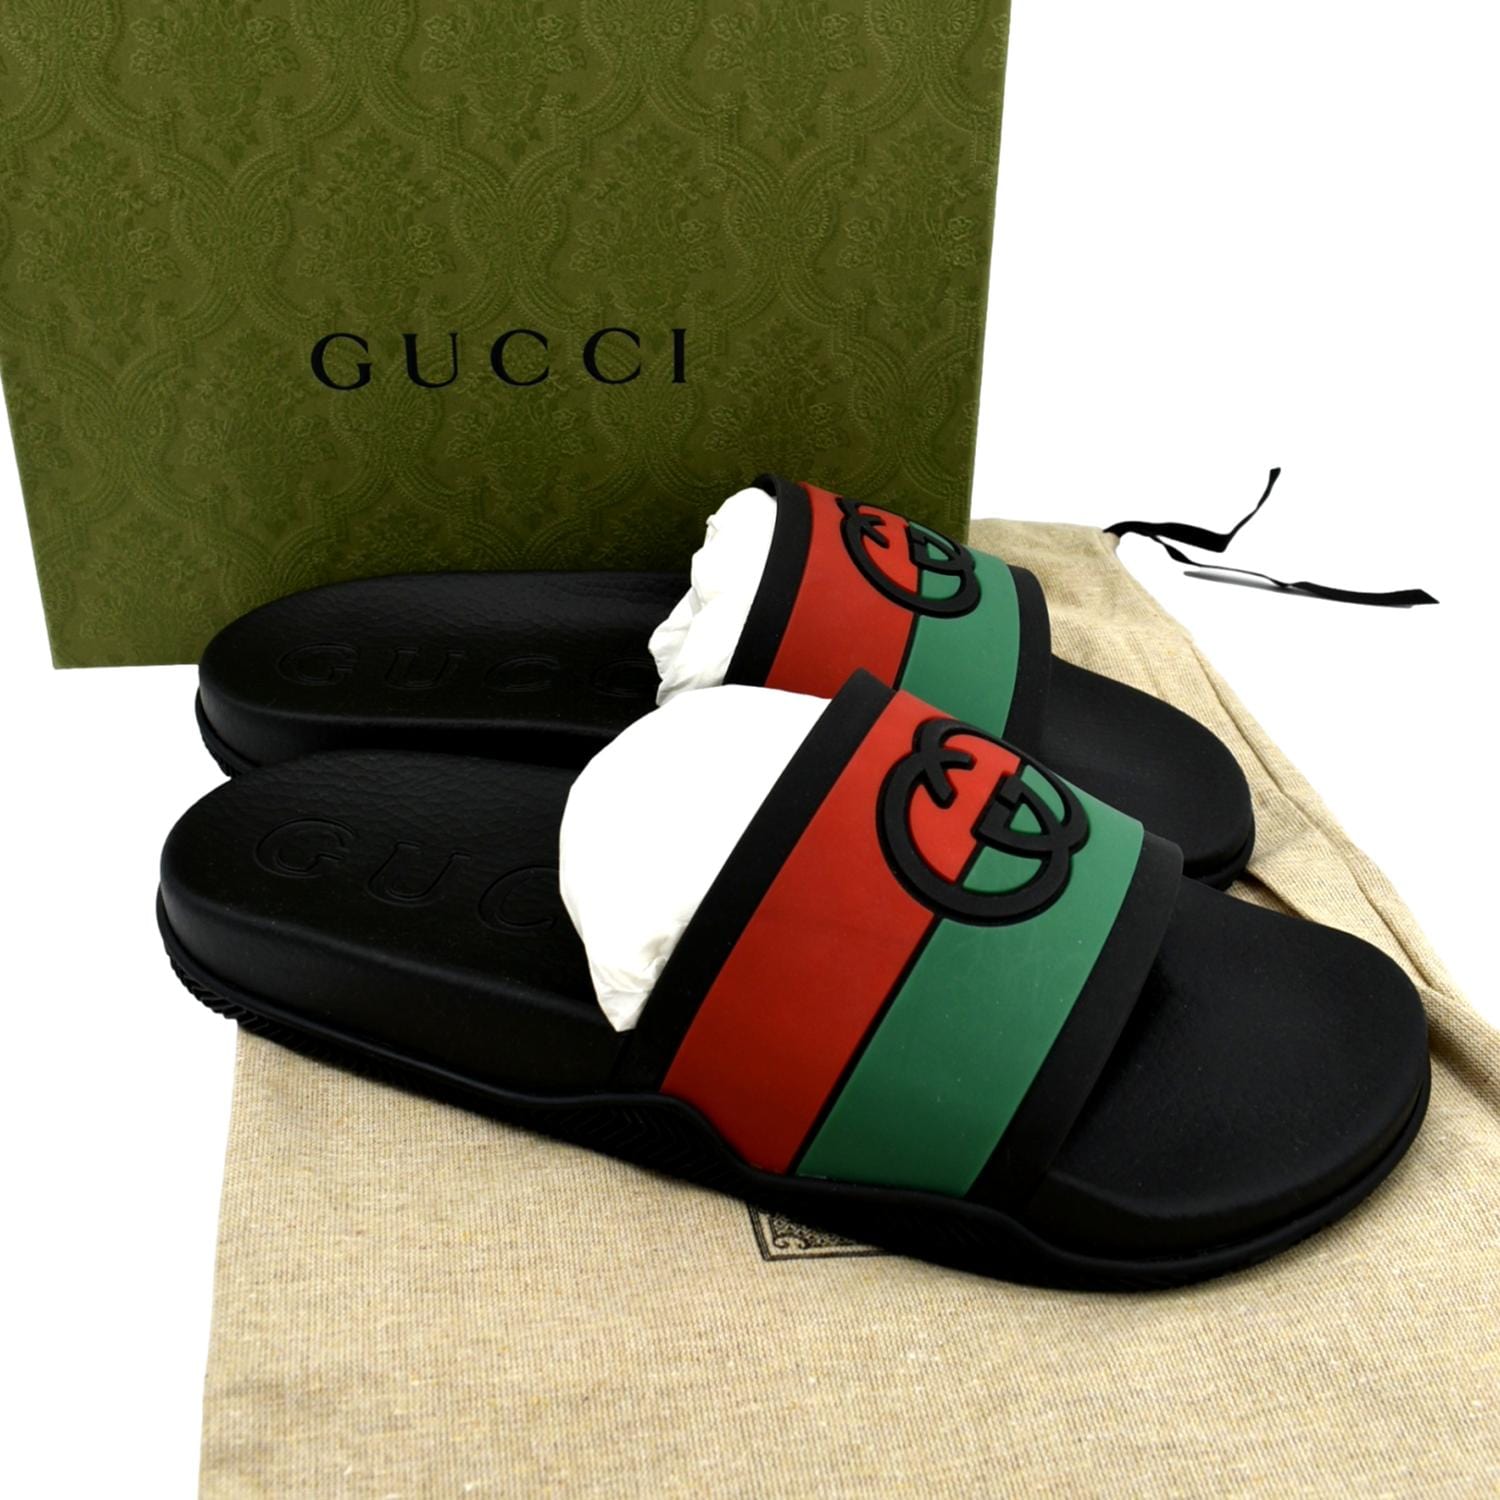 Gucci's VERY EXPENSIVE rubber sandals will remind you of your good